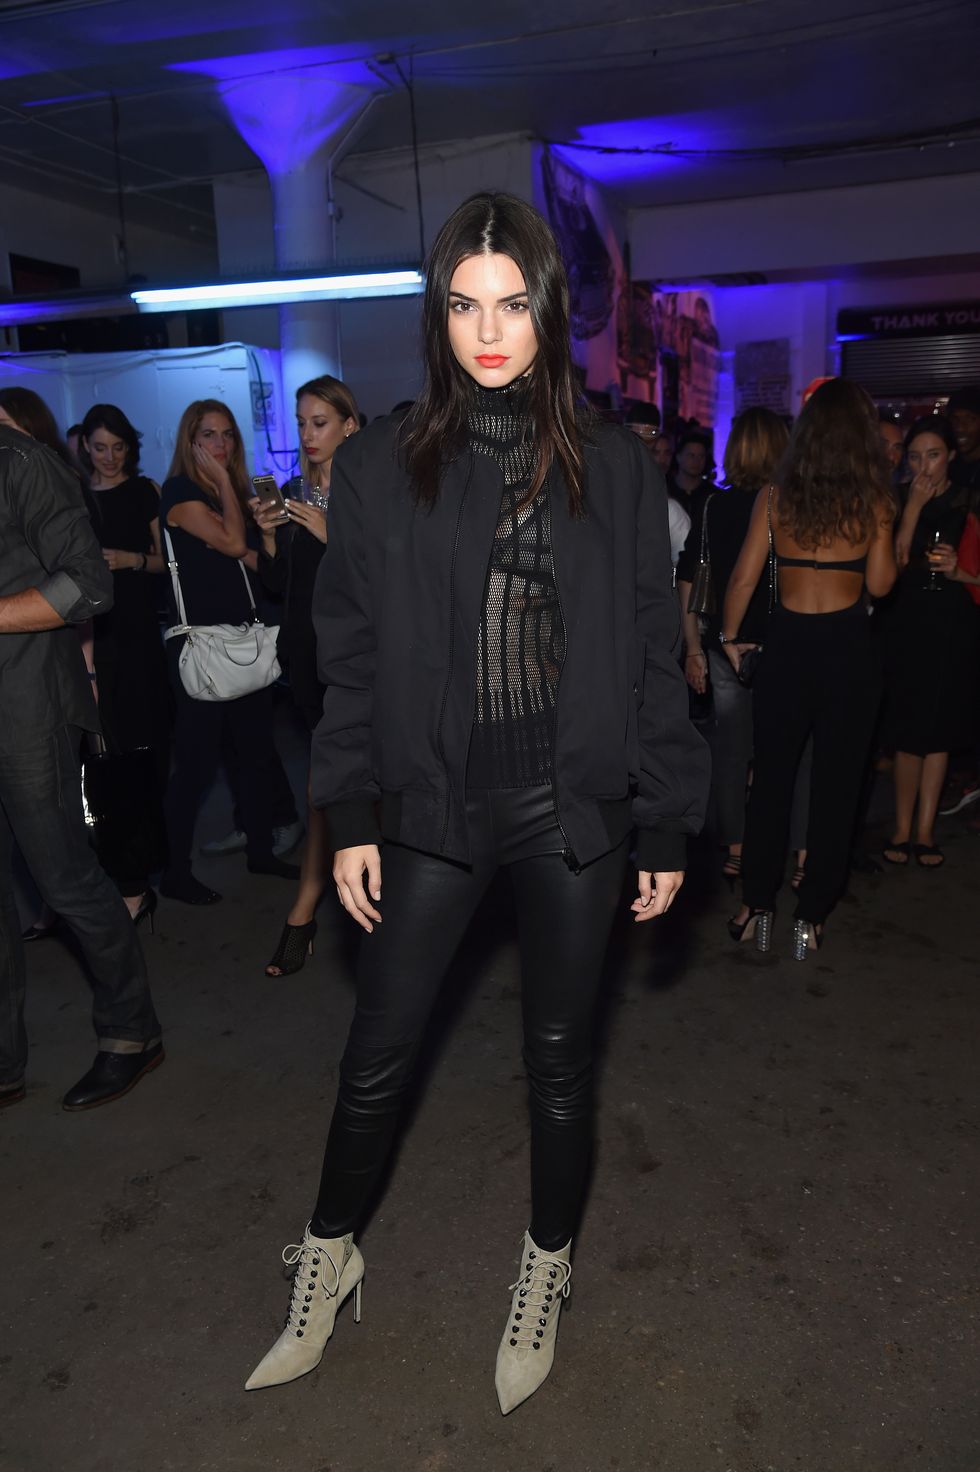 Kendall Jenner rocked the Givenchy SS16 catwalk with cool bleached brows